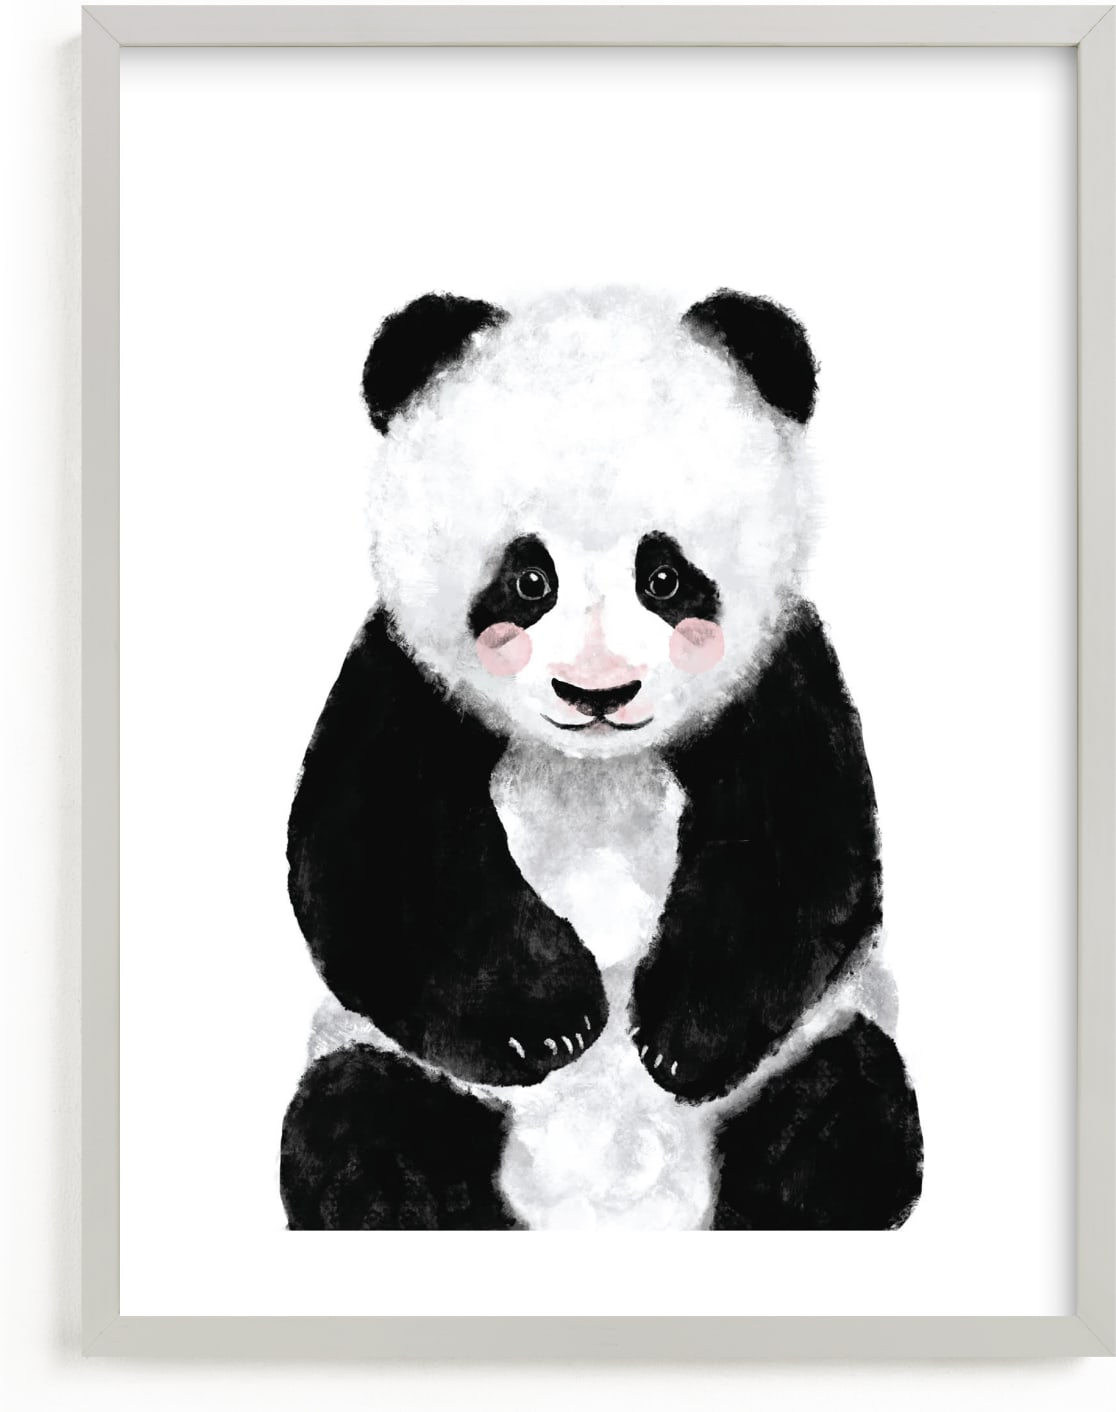 This is a black and white art by Cass Loh called Baby Panda.